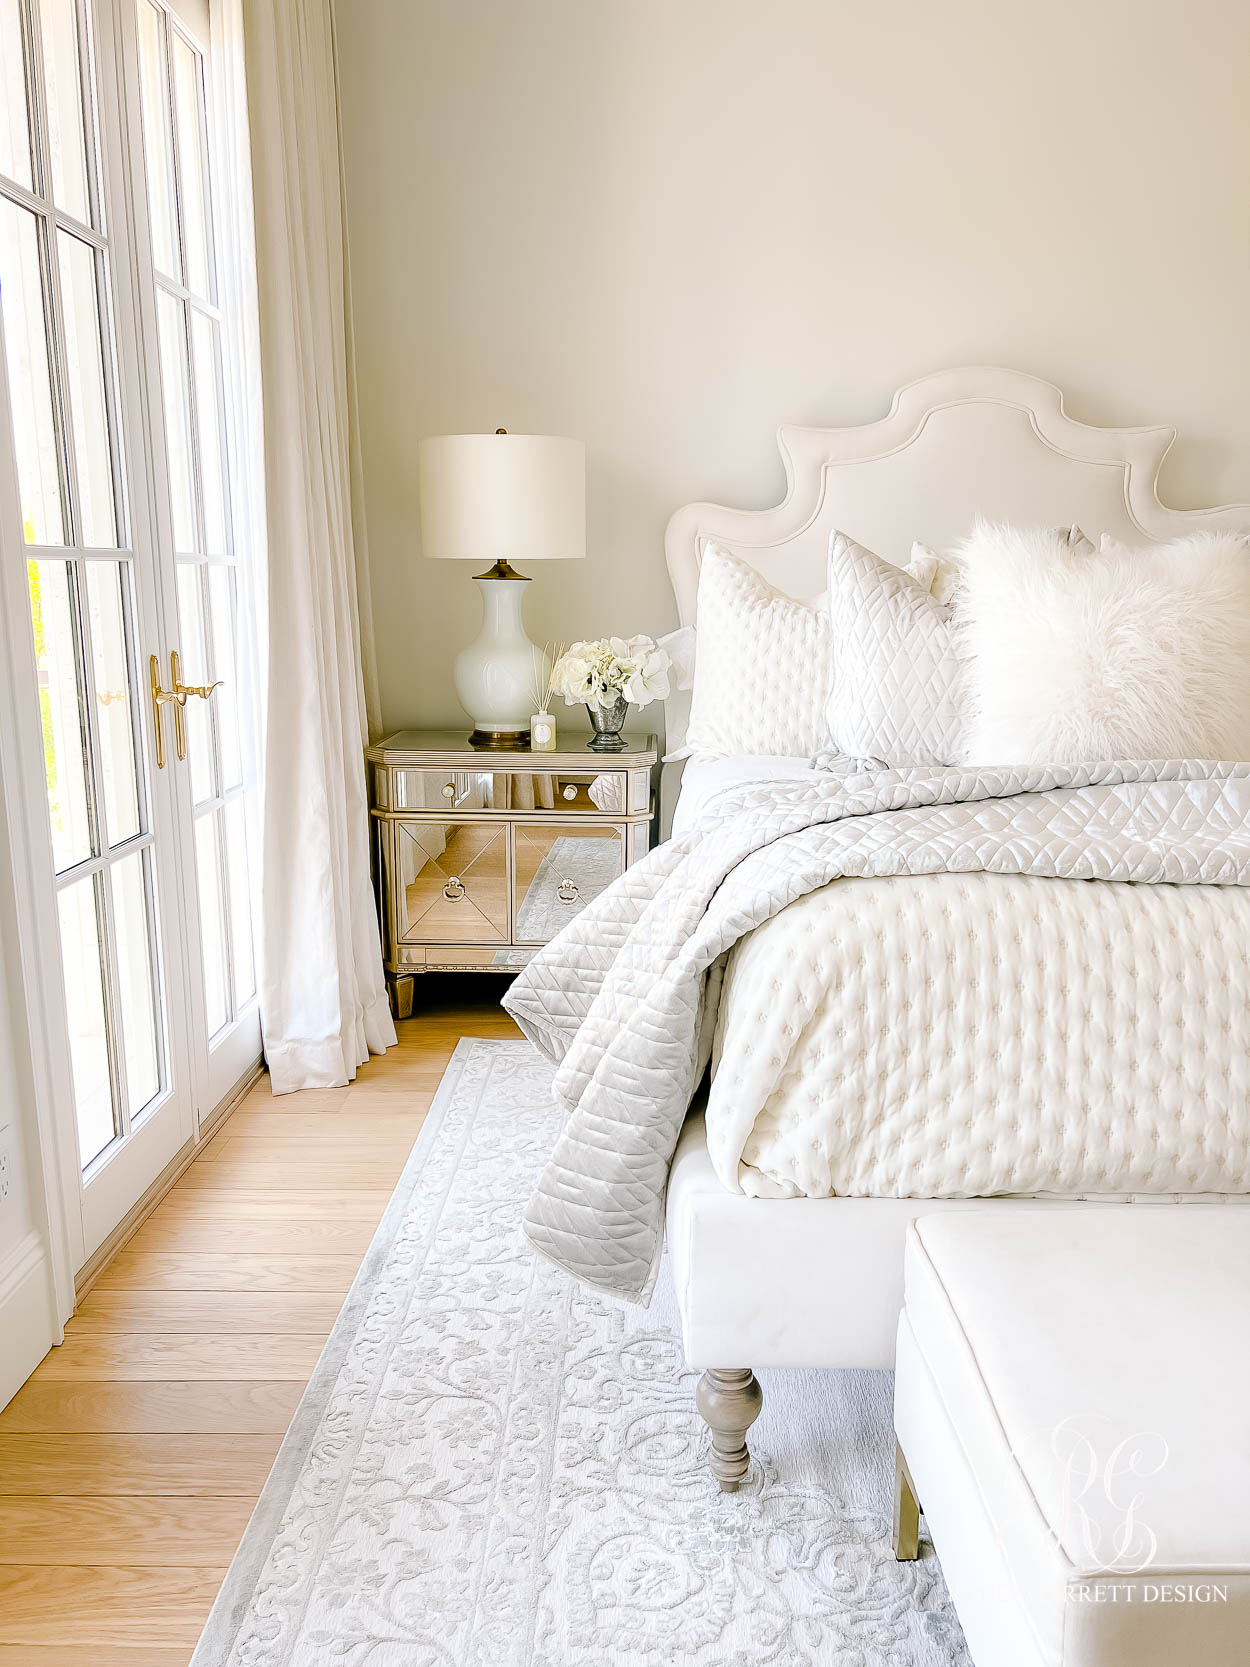 How to Start a Bedding Collection